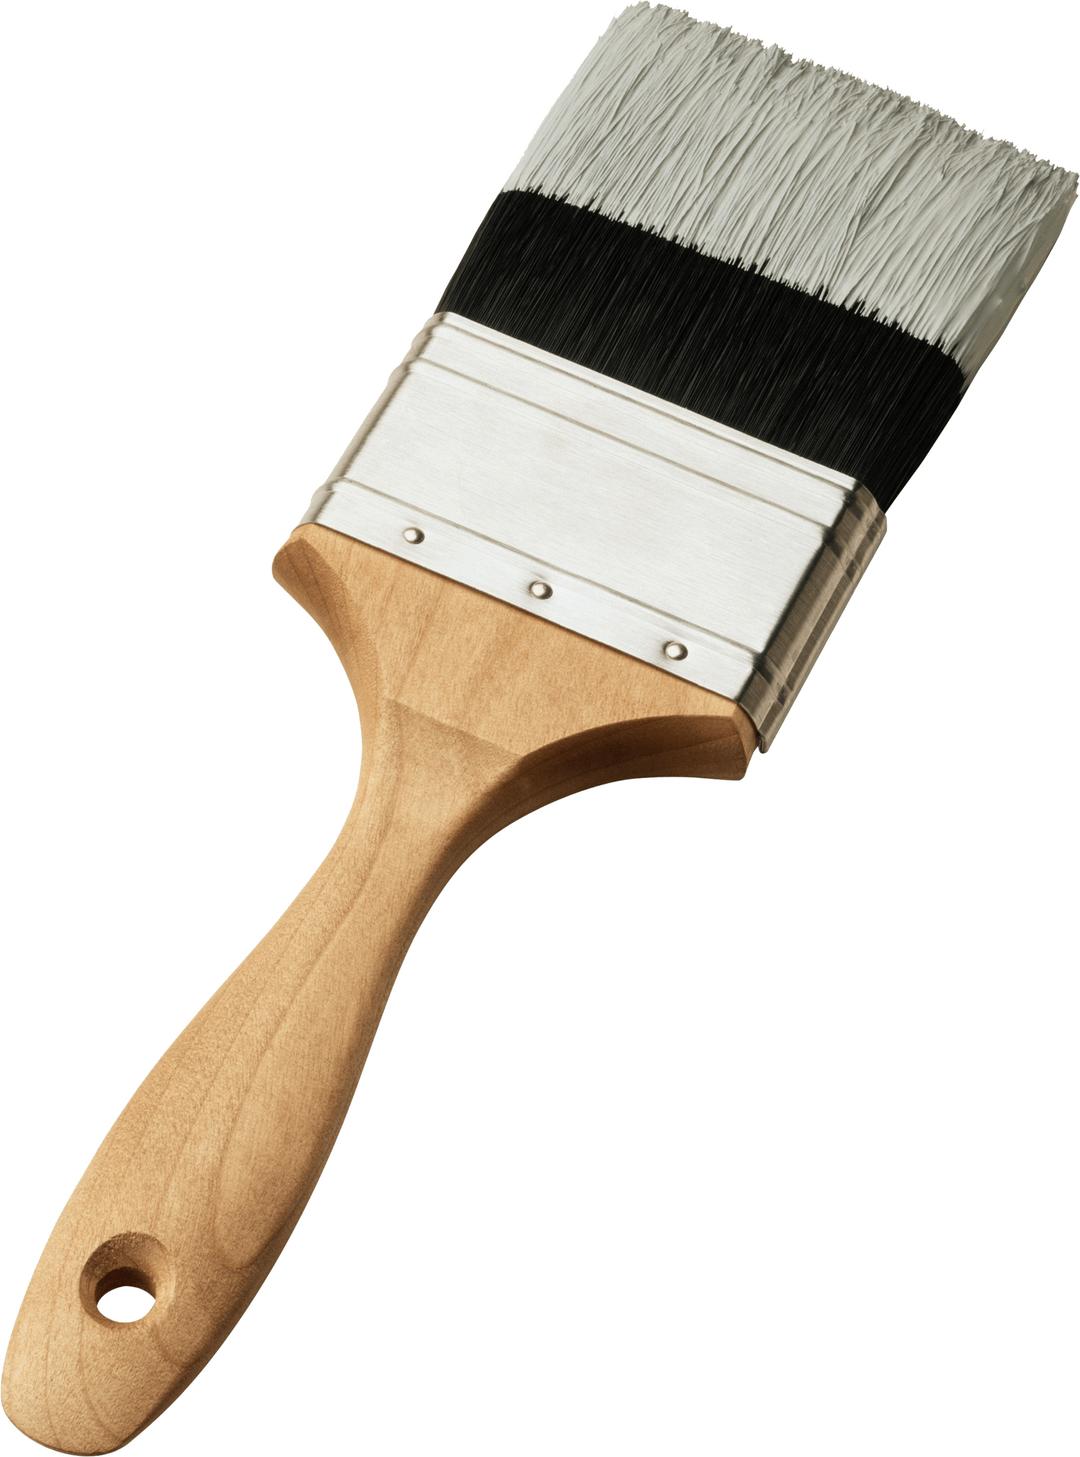 Brush Right png transparent